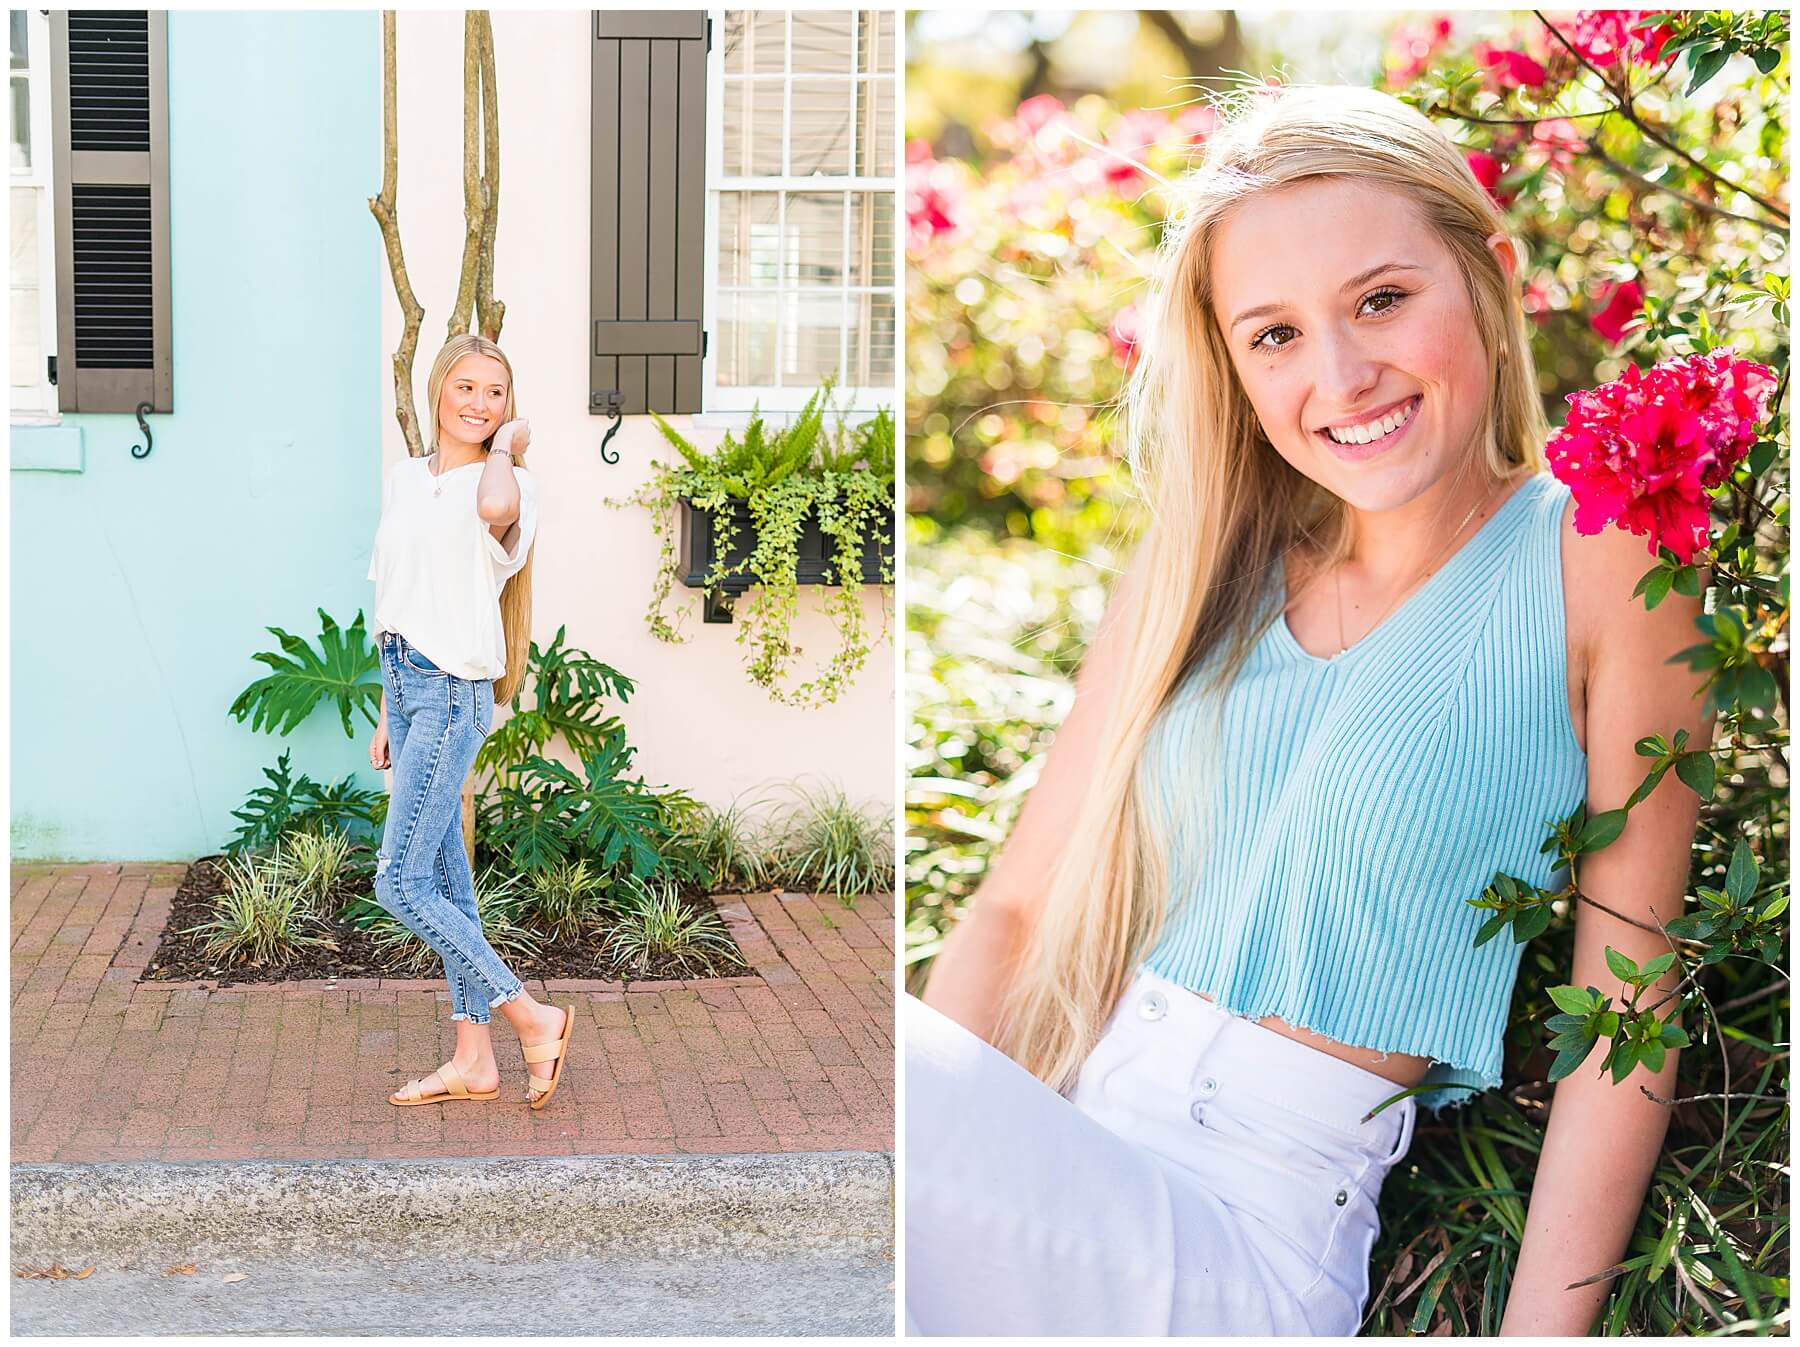 blonde girl in jeans and a white top walking in front of blue and cream stucco building and blonde girl in blue top and white pants sitting next to pink azalea bush in Downtown Savannah 